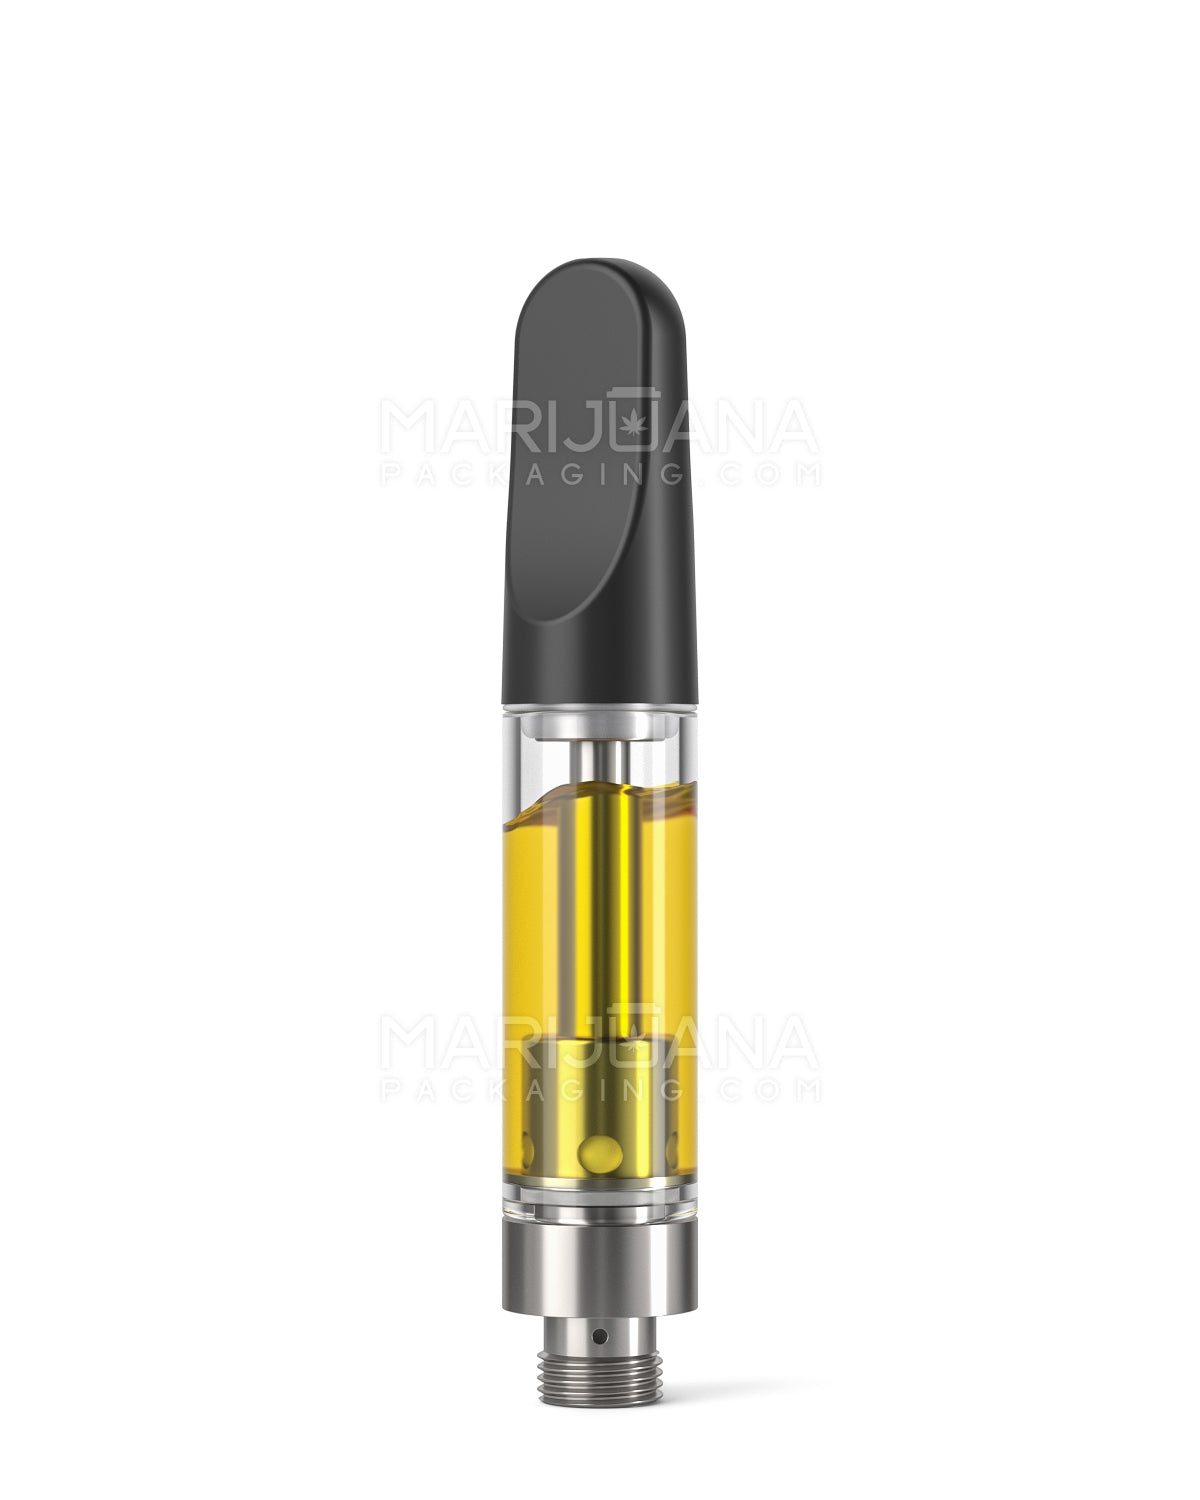 CCELL | Liquid6 Reactor Glass Vape Cartridge with Black Plastic Mouthpiece | 1mL - Screw On - 100 Count - 2